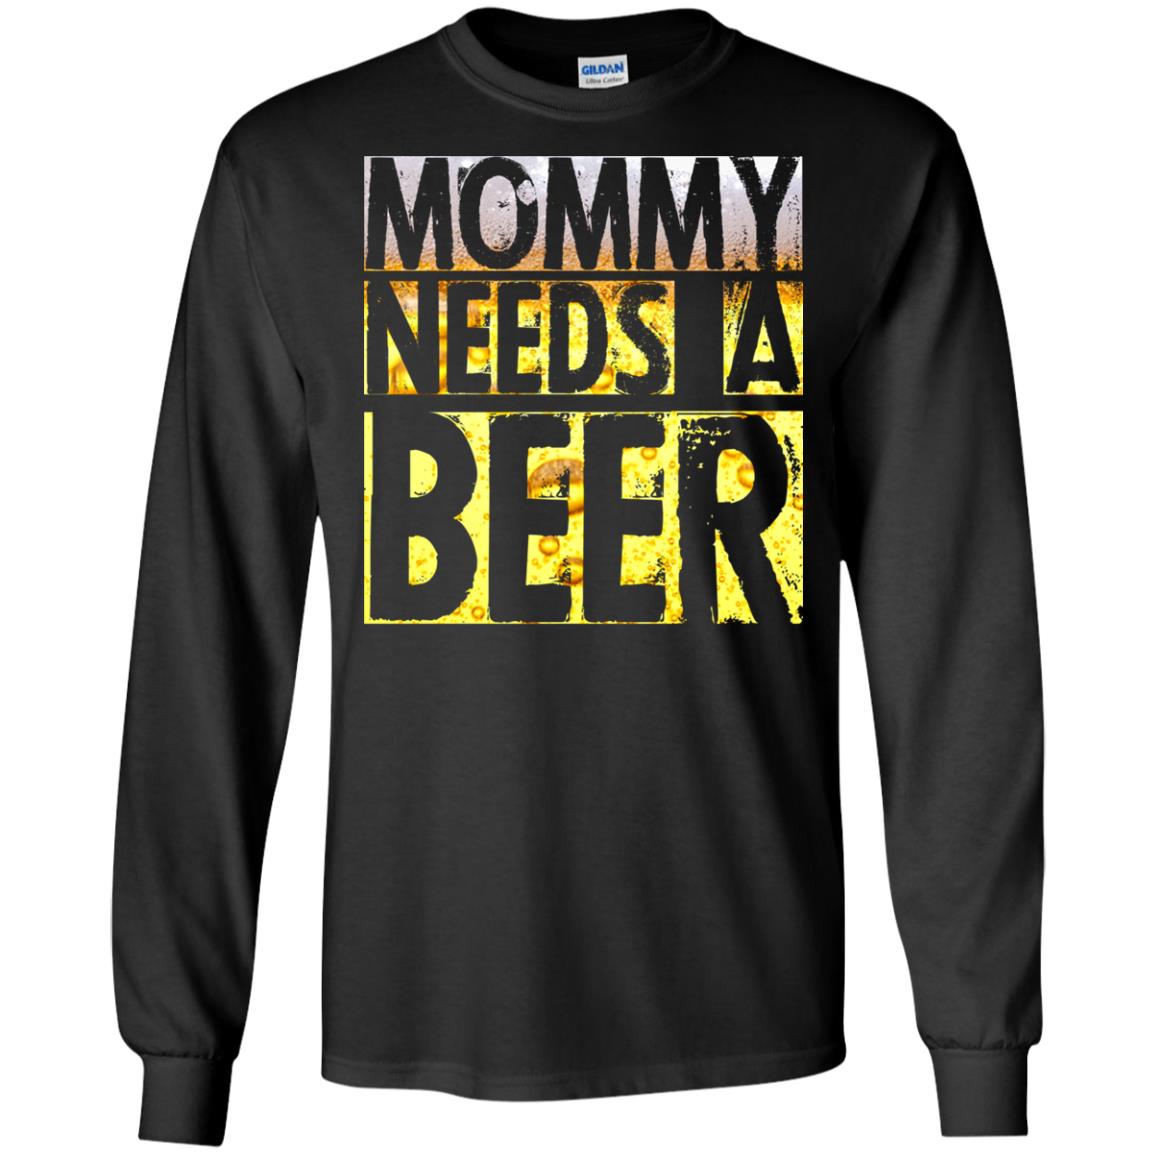 Mommy Needs A Beer Shirt For Mom Loves BeerG240 Gildan LS Ultra Cotton T-Shirt